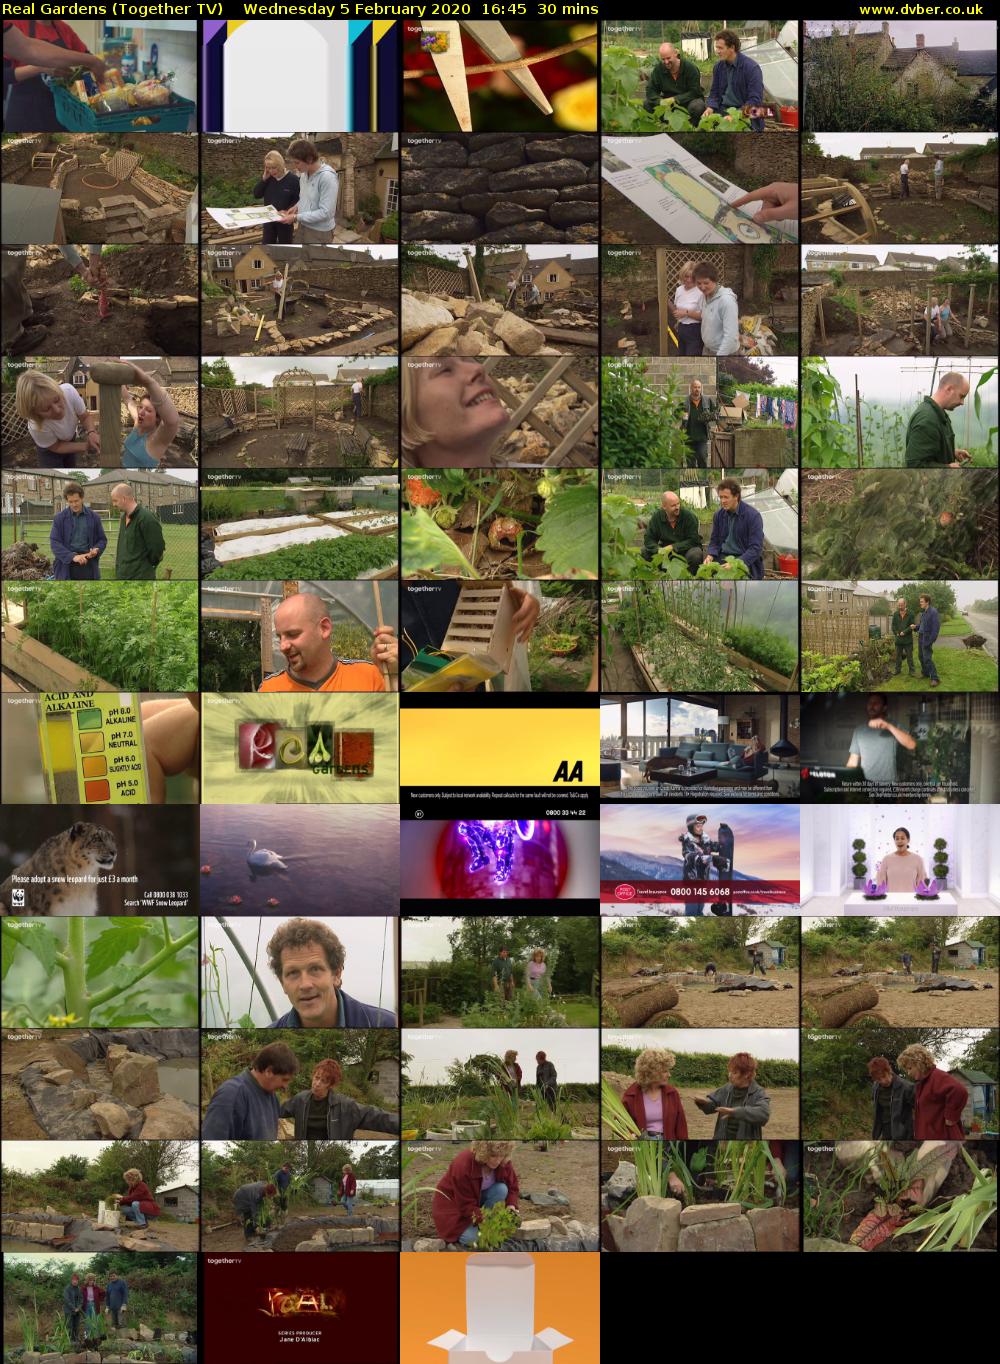 Real Gardens (Together TV) Wednesday 5 February 2020 16:45 - 17:15